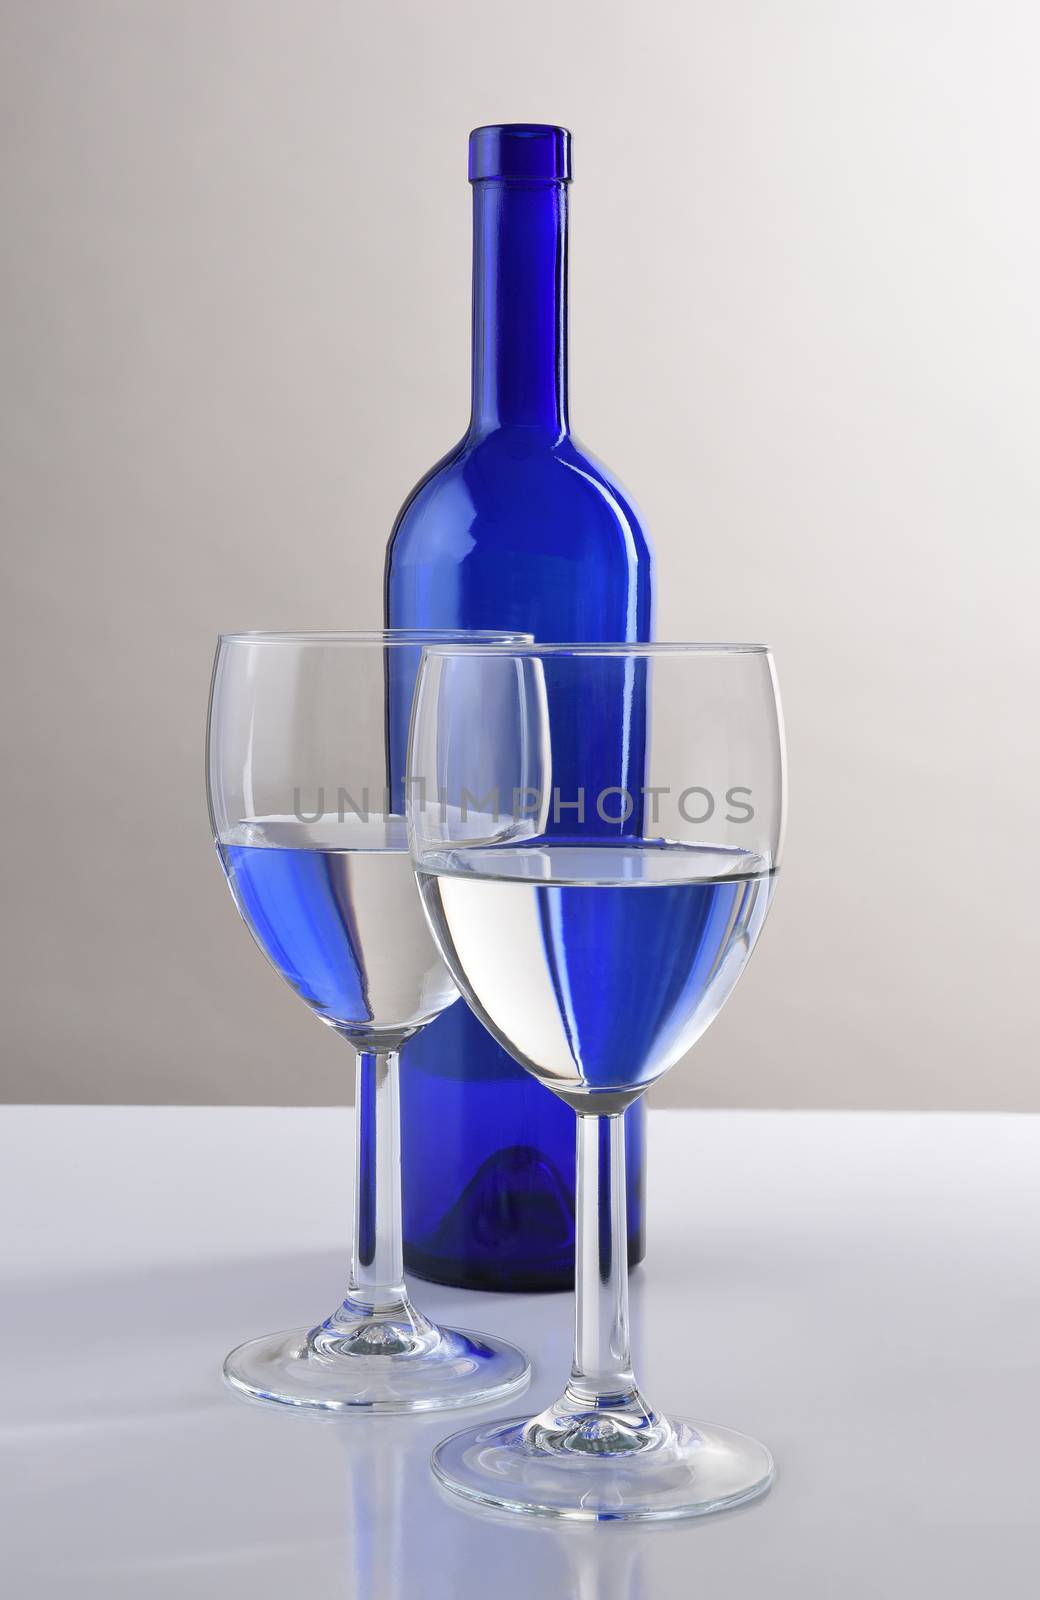 Blue Wine Bottle and Glasses by sCukrov